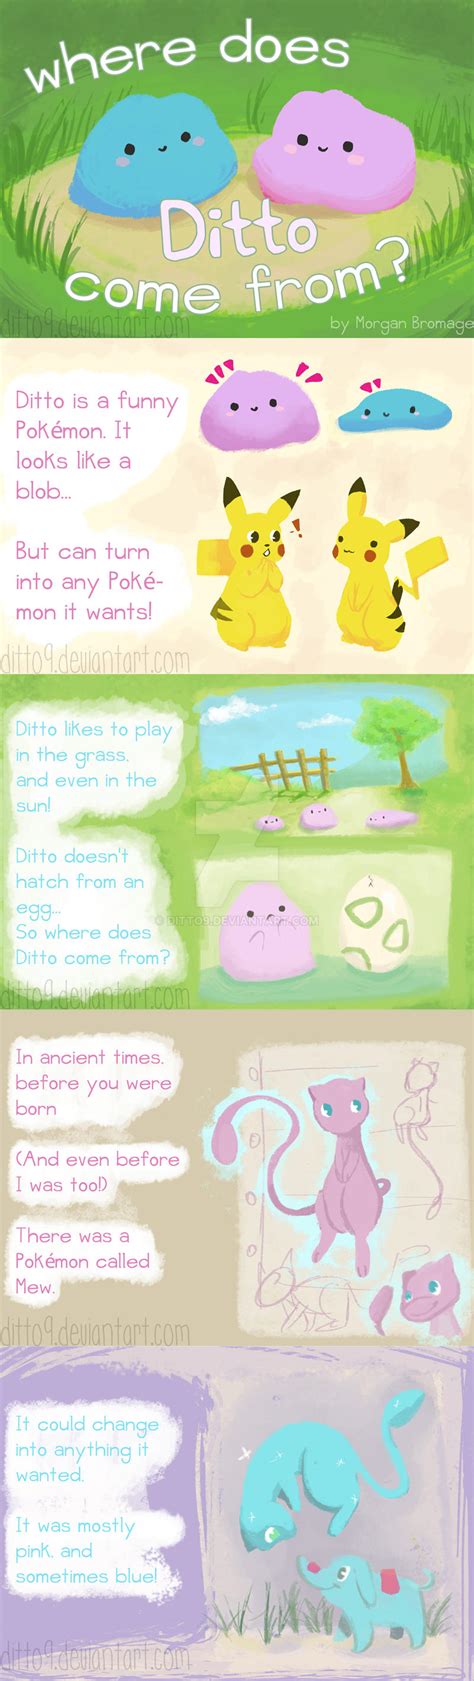 Where Does Ditto Come From By Ditto9 On Deviantart